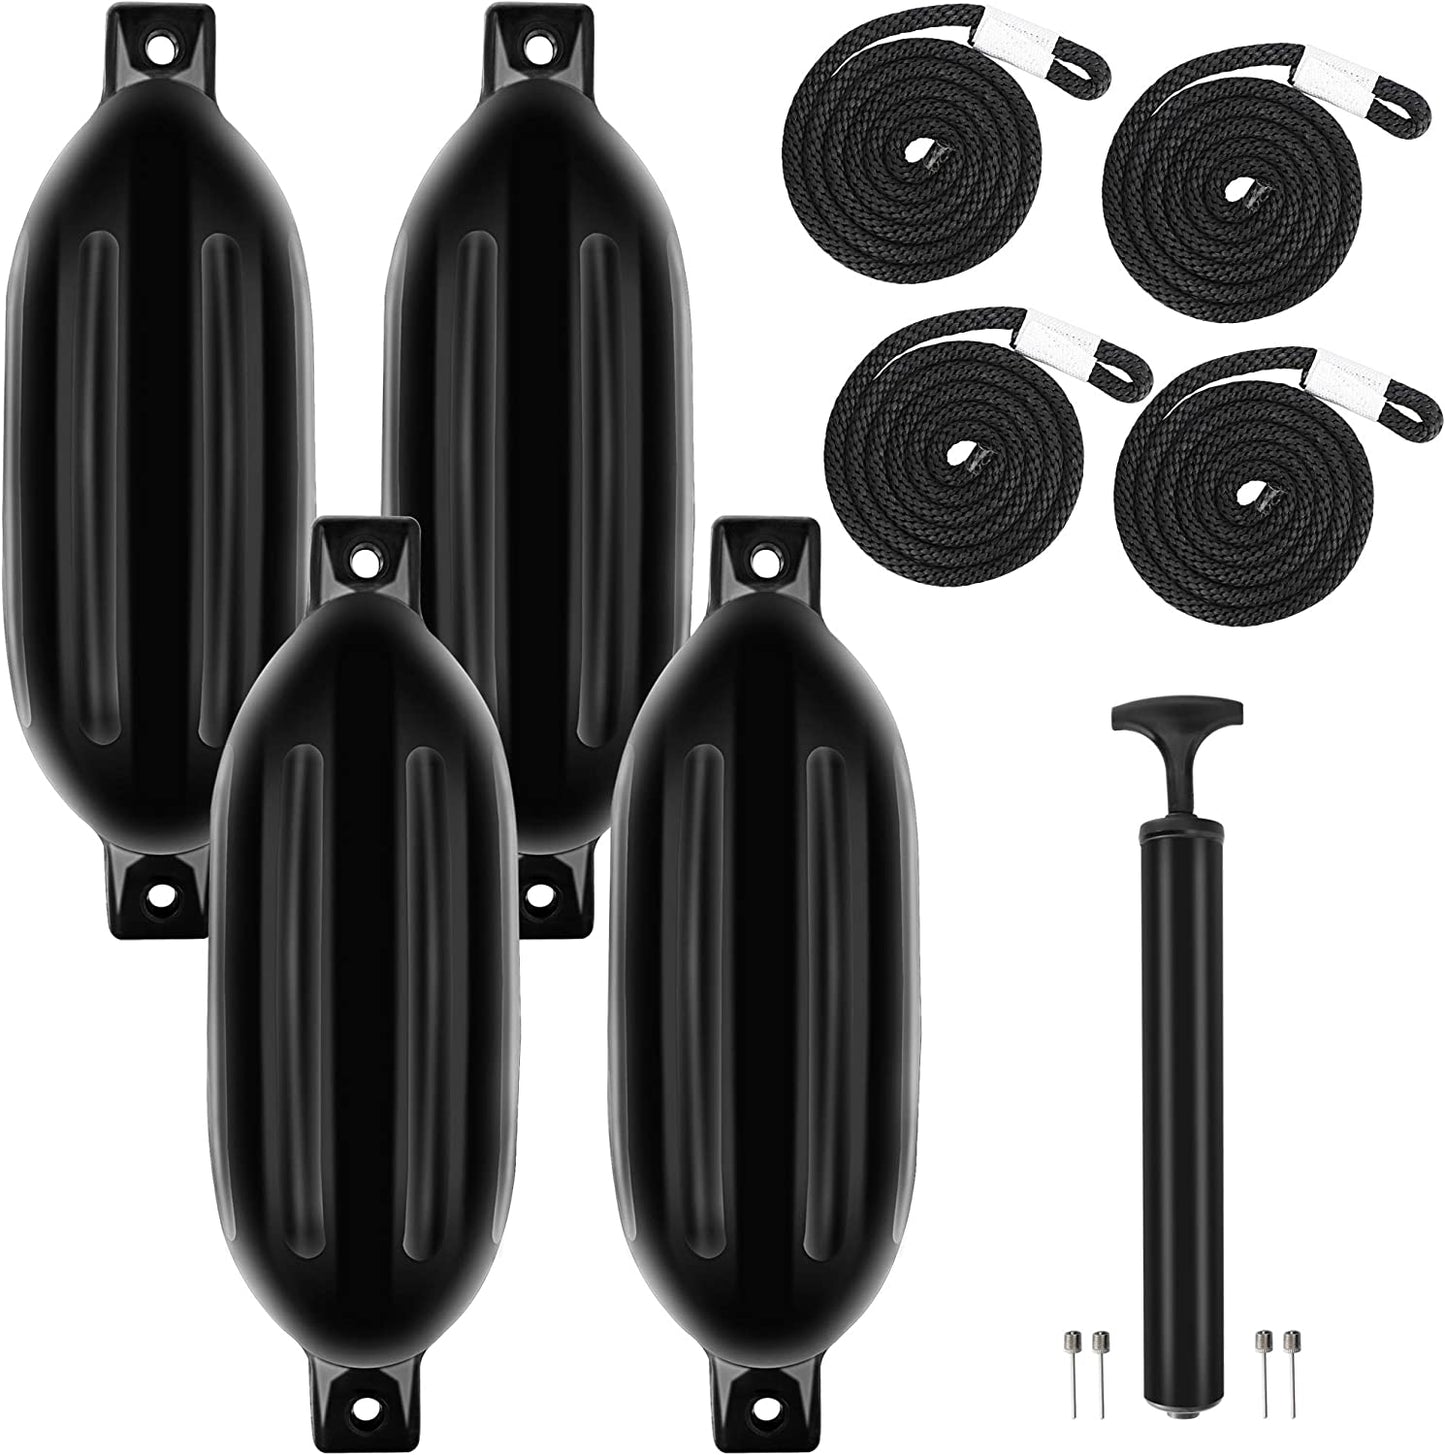 Boat Fenders 4 Pack Vinyl Ribbed Marine Boat Bumpers for Docking Twin Eyes Dock Shield Protection w/Boat Fender Line and Pump, 6.5’’x24’’ Larger Size